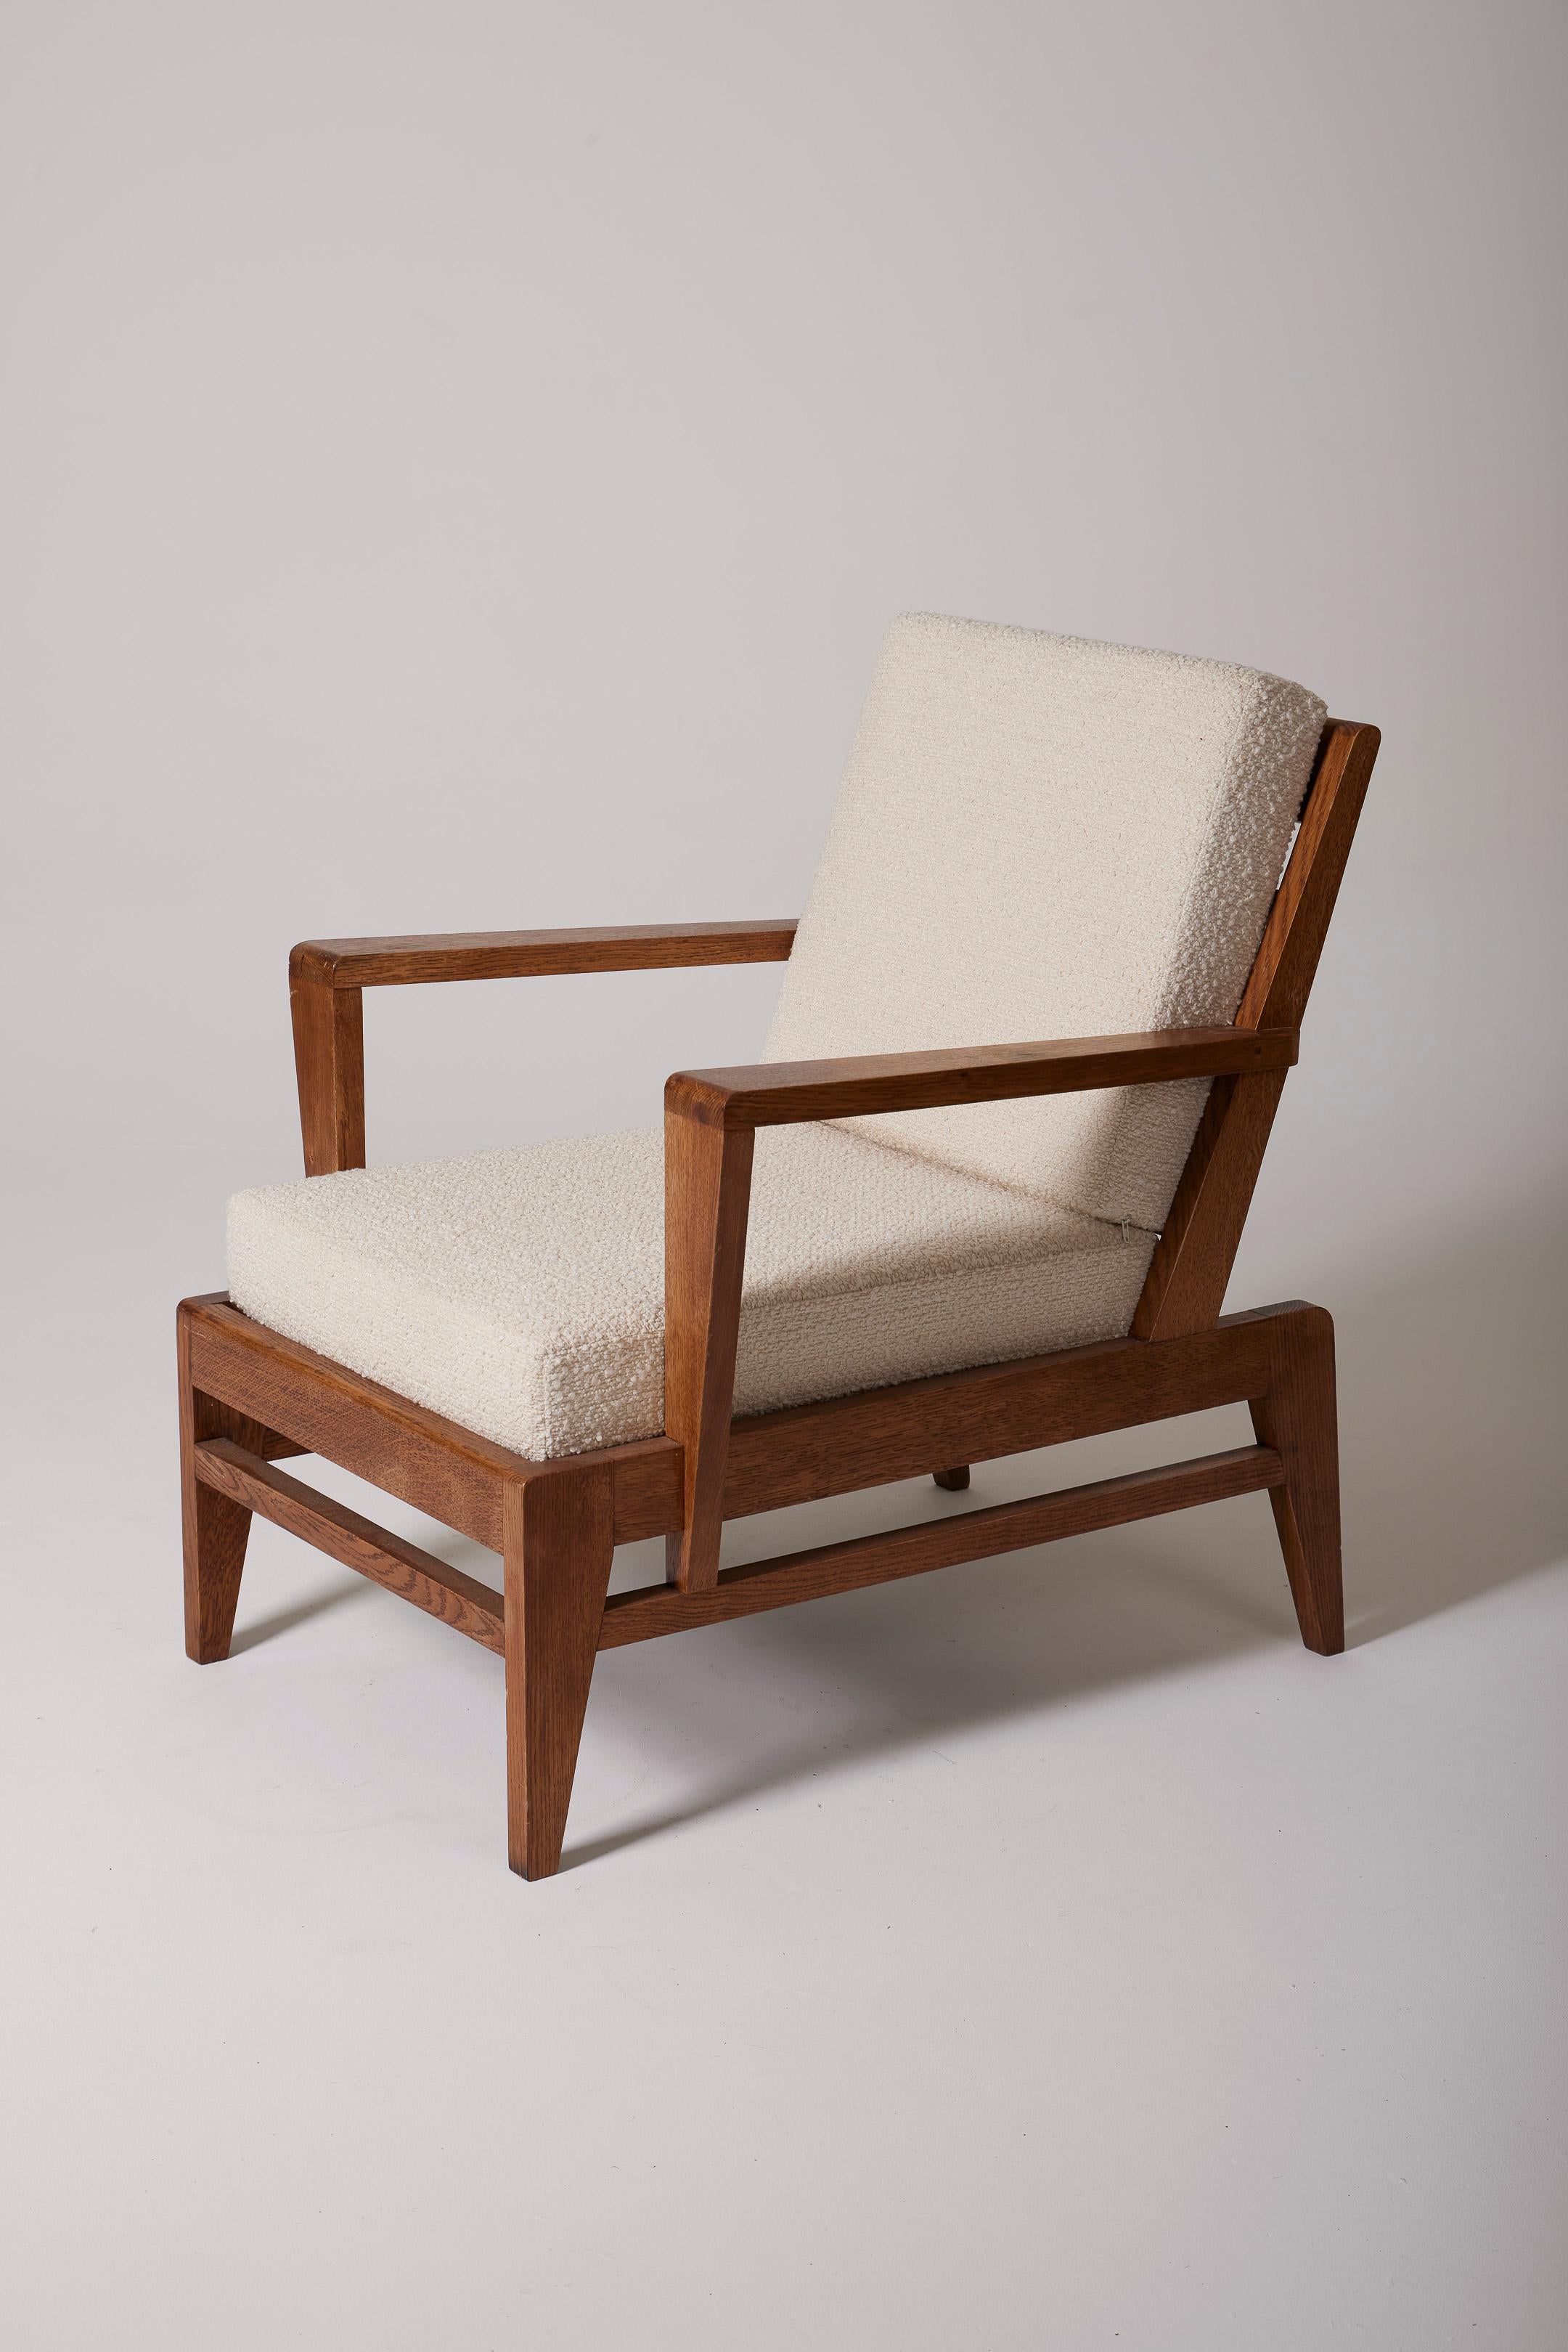 Rare armchair by French designer René Gabriel (1890-1950) from the 1950s. The armchair's frame is made of solid oak, with a beautiful patina, and the backrest and seat are upholstered in white/ecru bouclé fabric. Good overall condition. In 1944, the